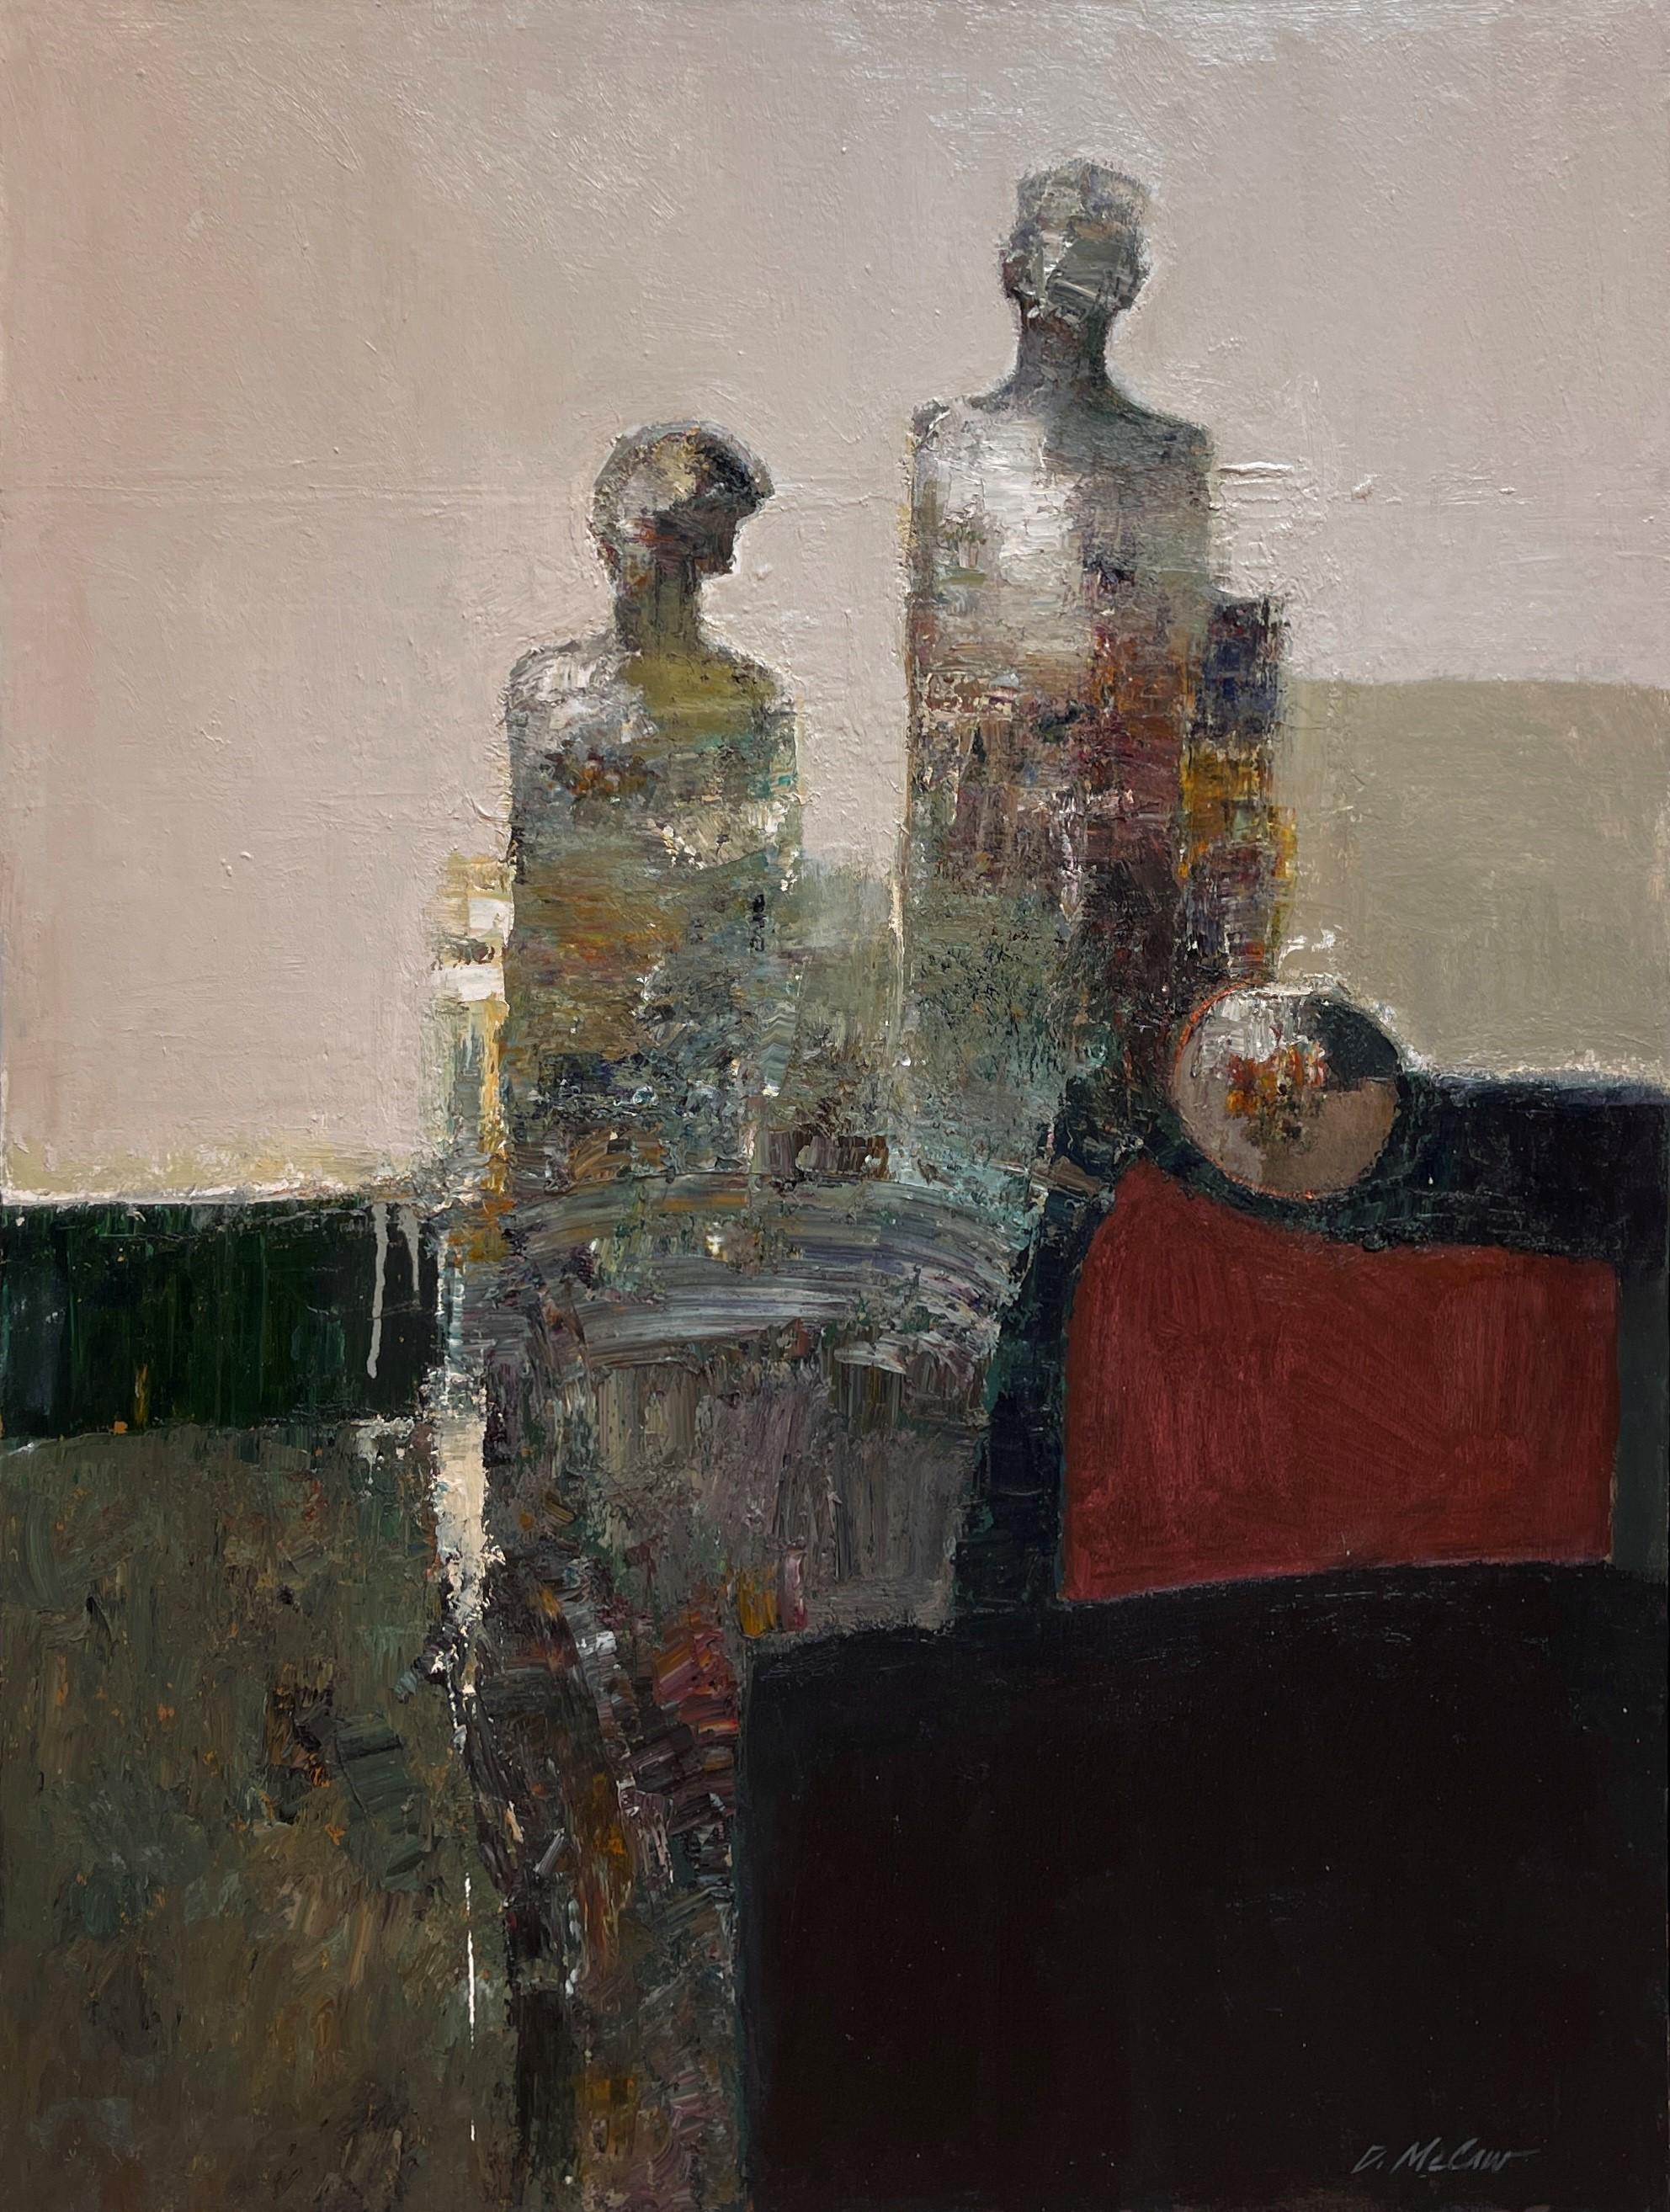 Dan McCaw's "Observation," created in 2018, is a striking oil painting measuring 48 x 36 inches (121.92 x 91.44 cm) with framed dimensions of 49 x 36 inches. This original artwork features an abstract composition of figures, rendered with rich